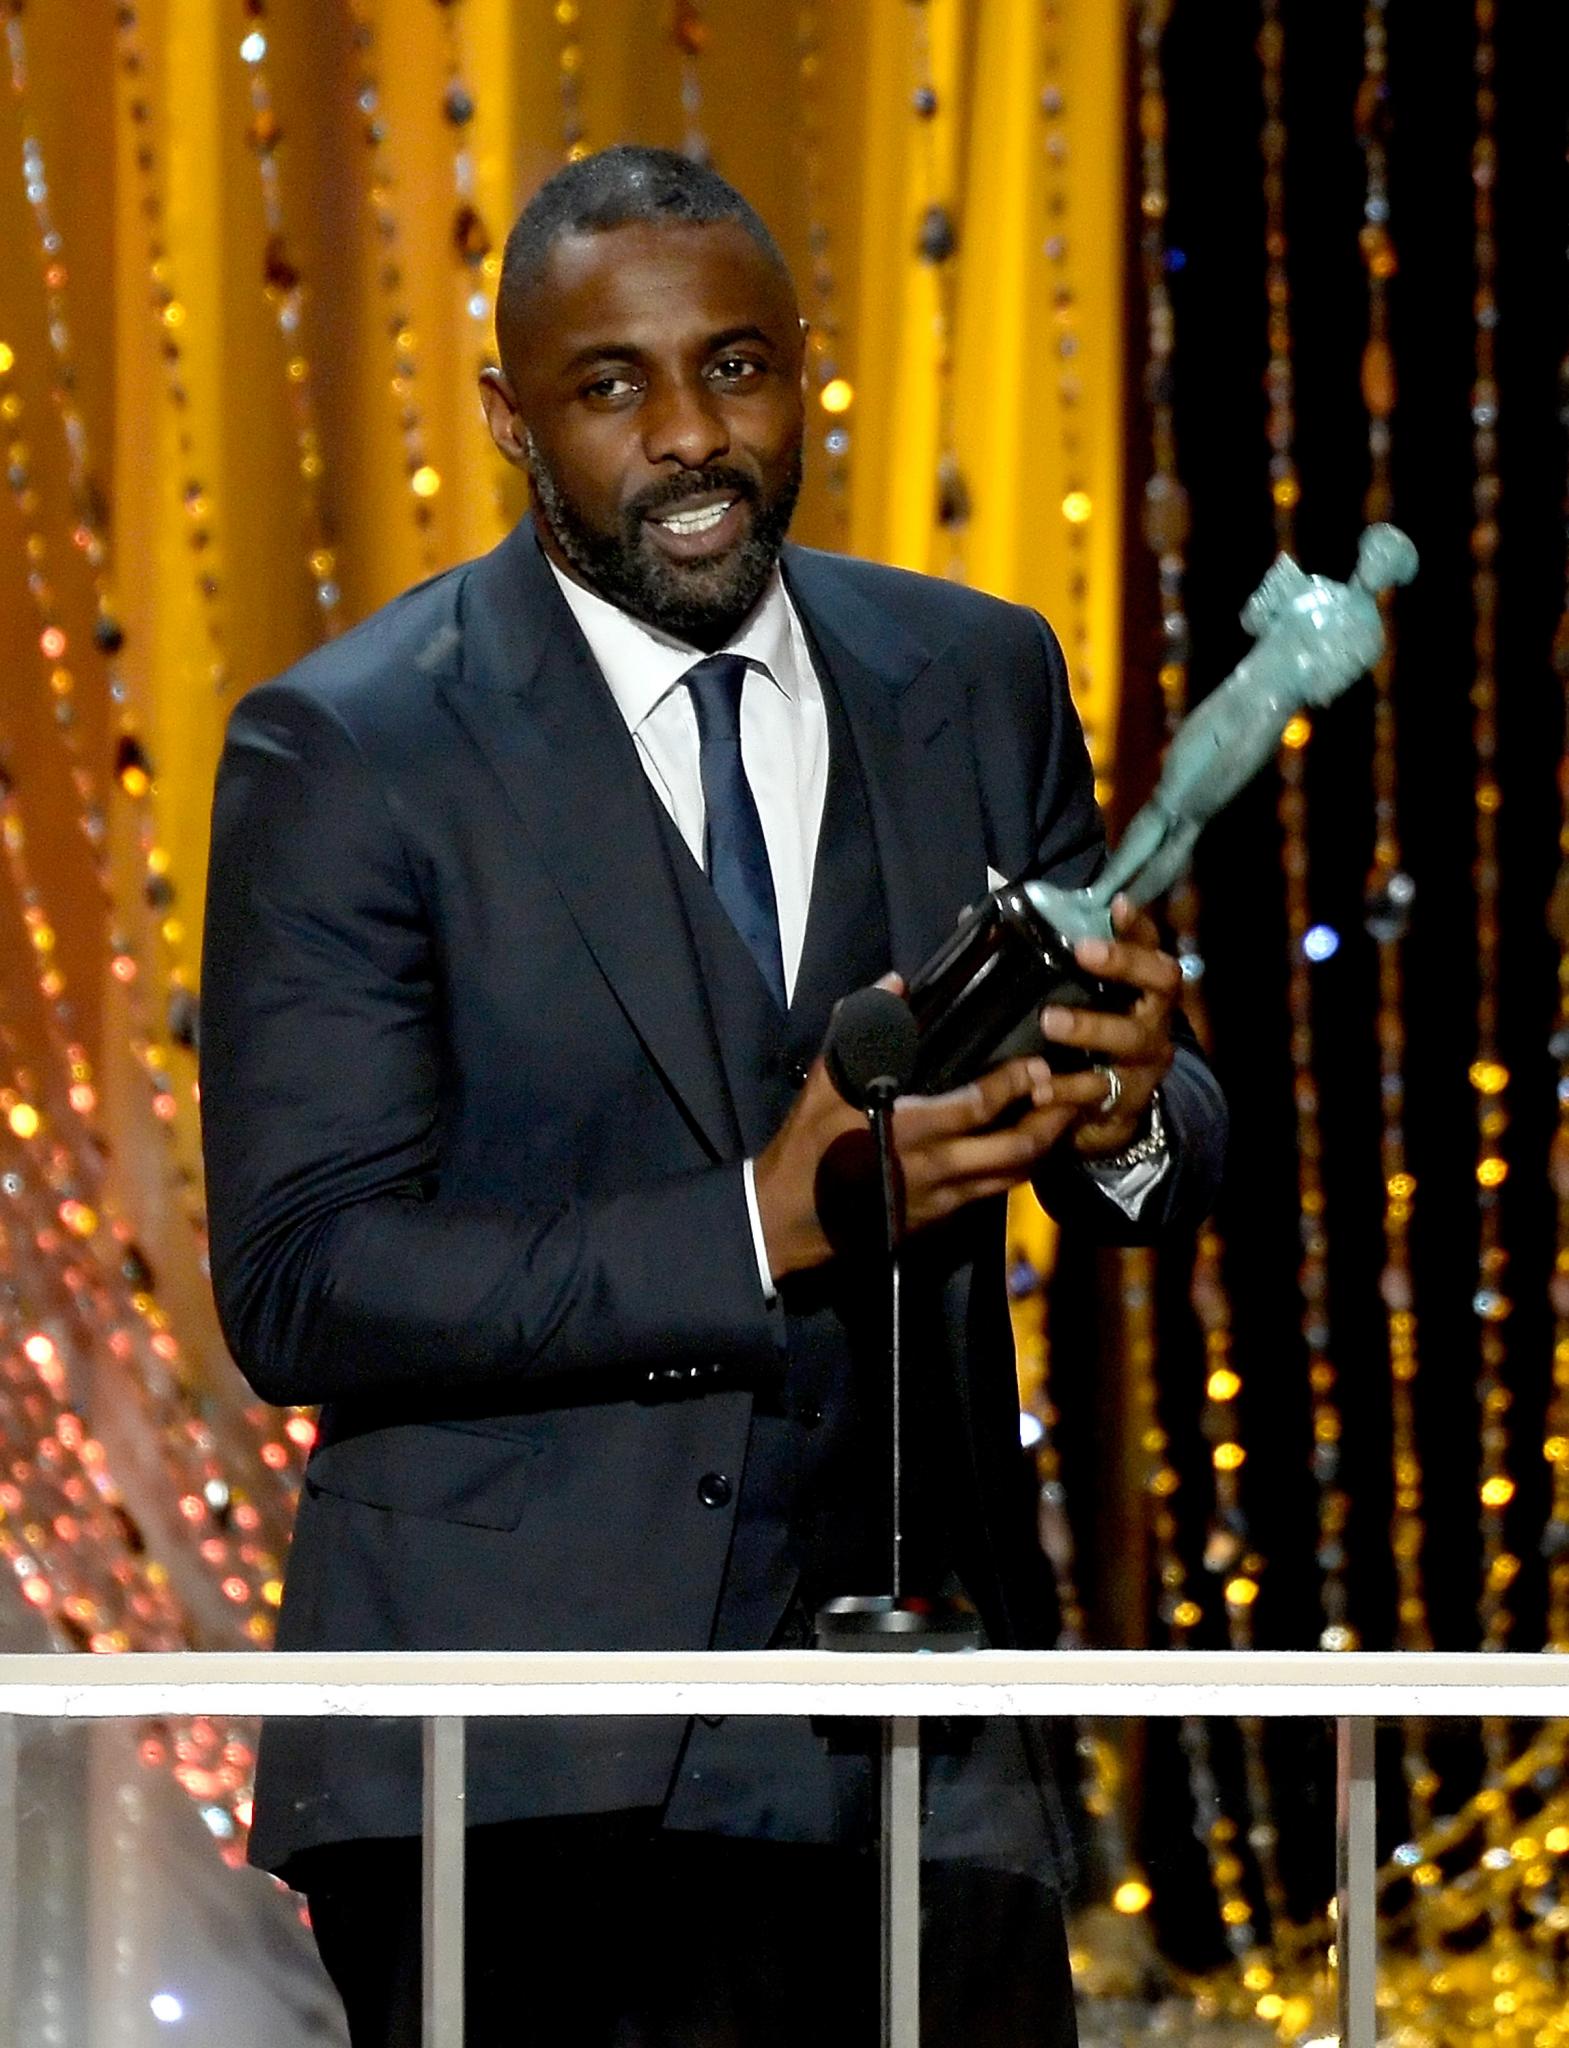 Idris Elba Takes Home SAG Awards for Both 'Luther' and 'Beasts of No Nation'
